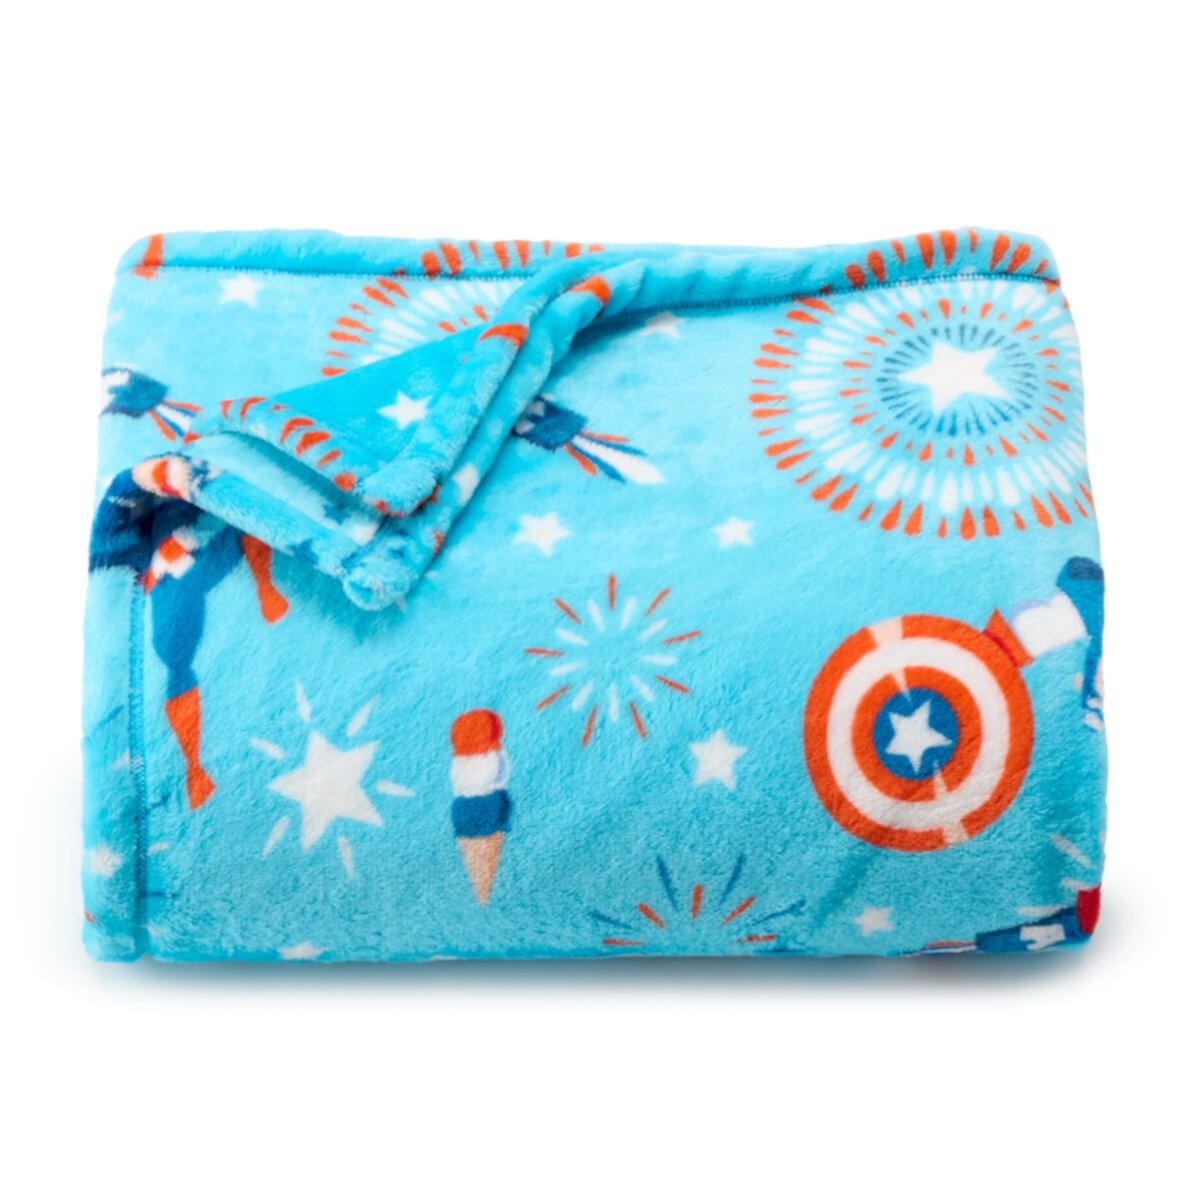 The Big One® Marvel Oversized Supersoft Plush Throw The Big One Marvel